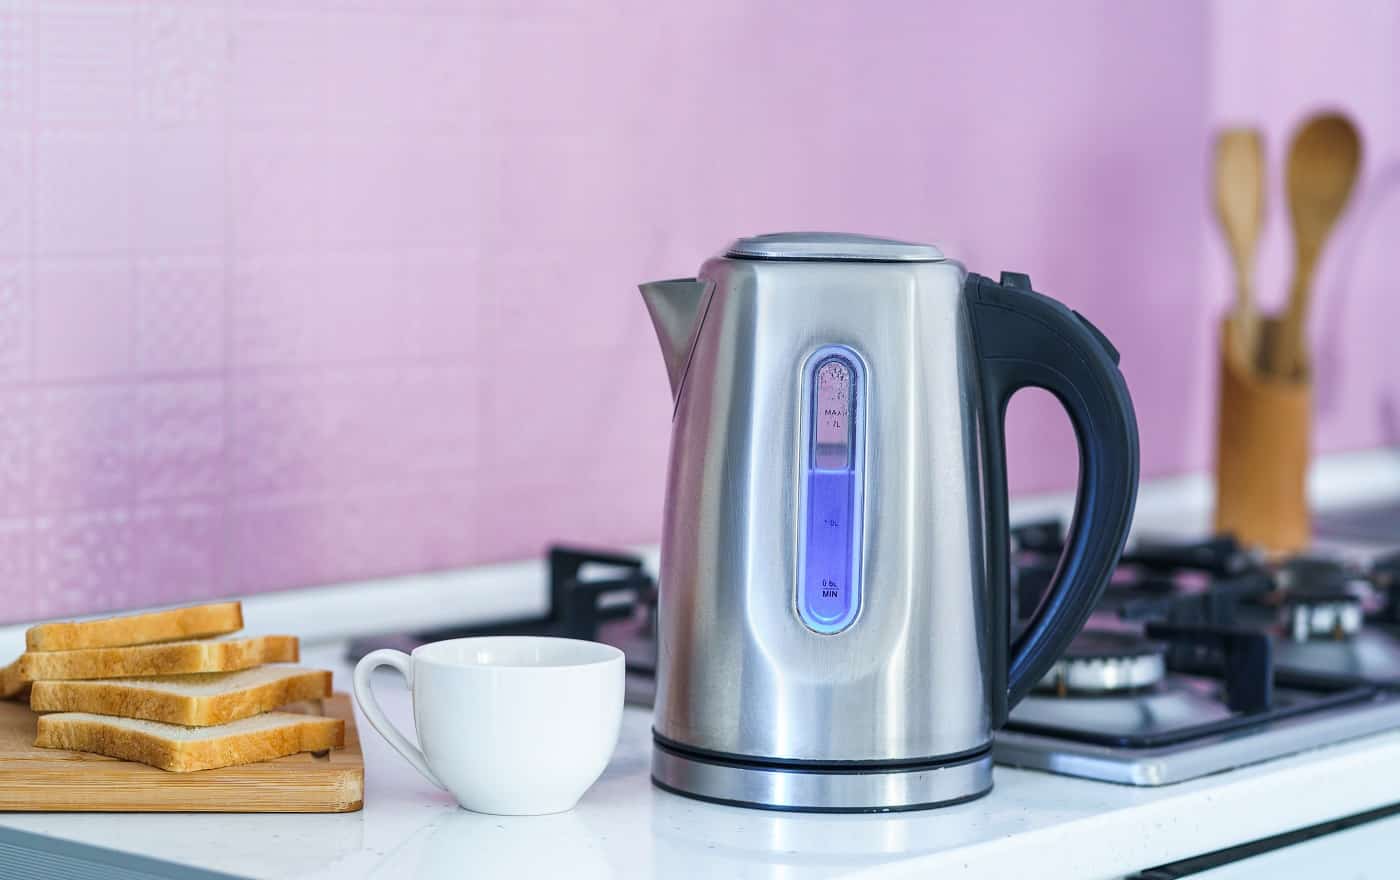 Using an electric kettle for brewing tea at home at kitchen